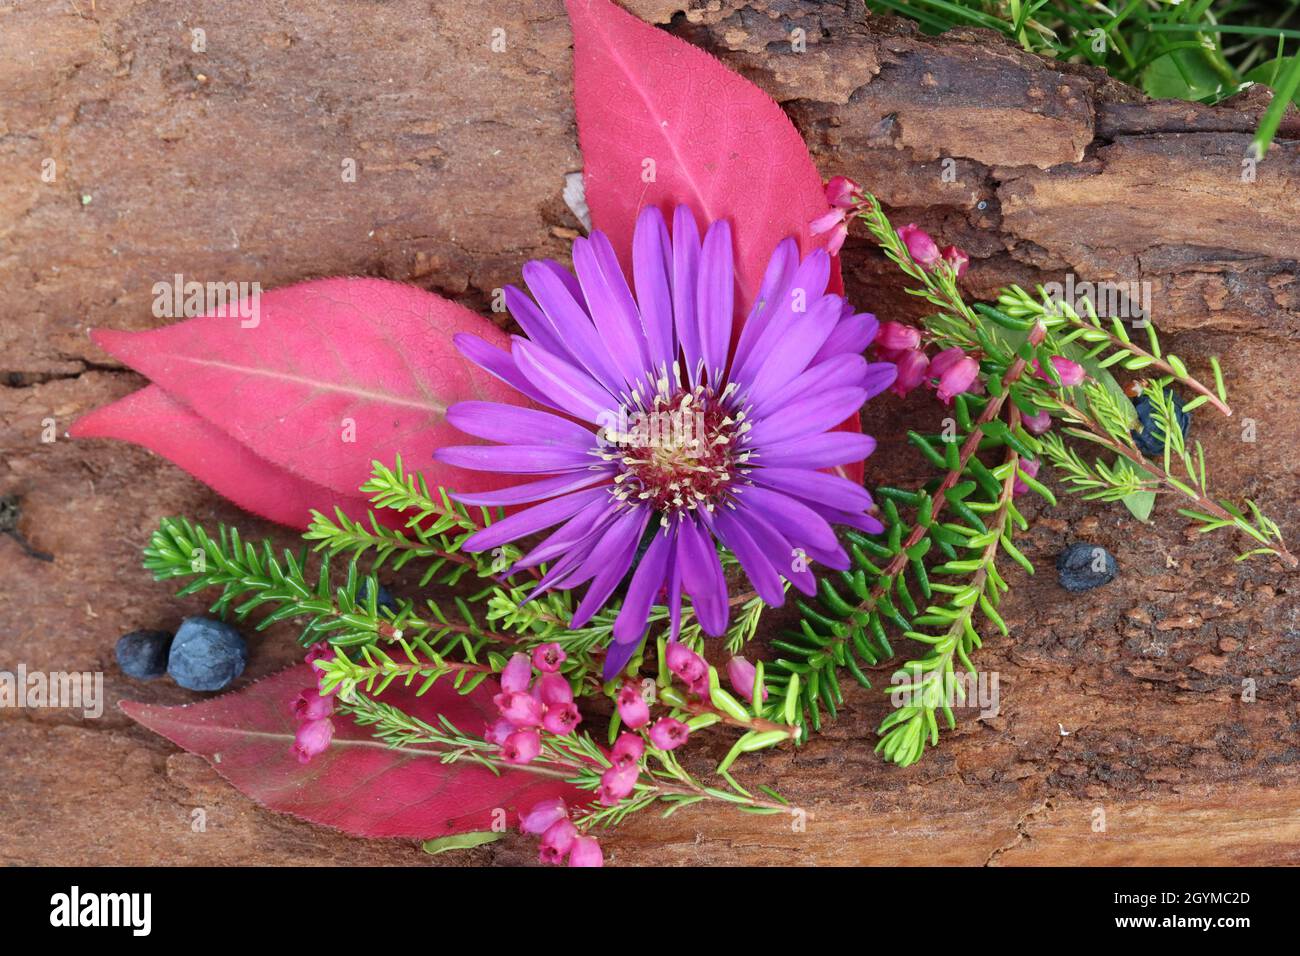 a autumnal arrangement on a piece of tree bark consisting of pink leaves, heather branches, some blue berries and the flower head of an aster dumosus Stock Photo